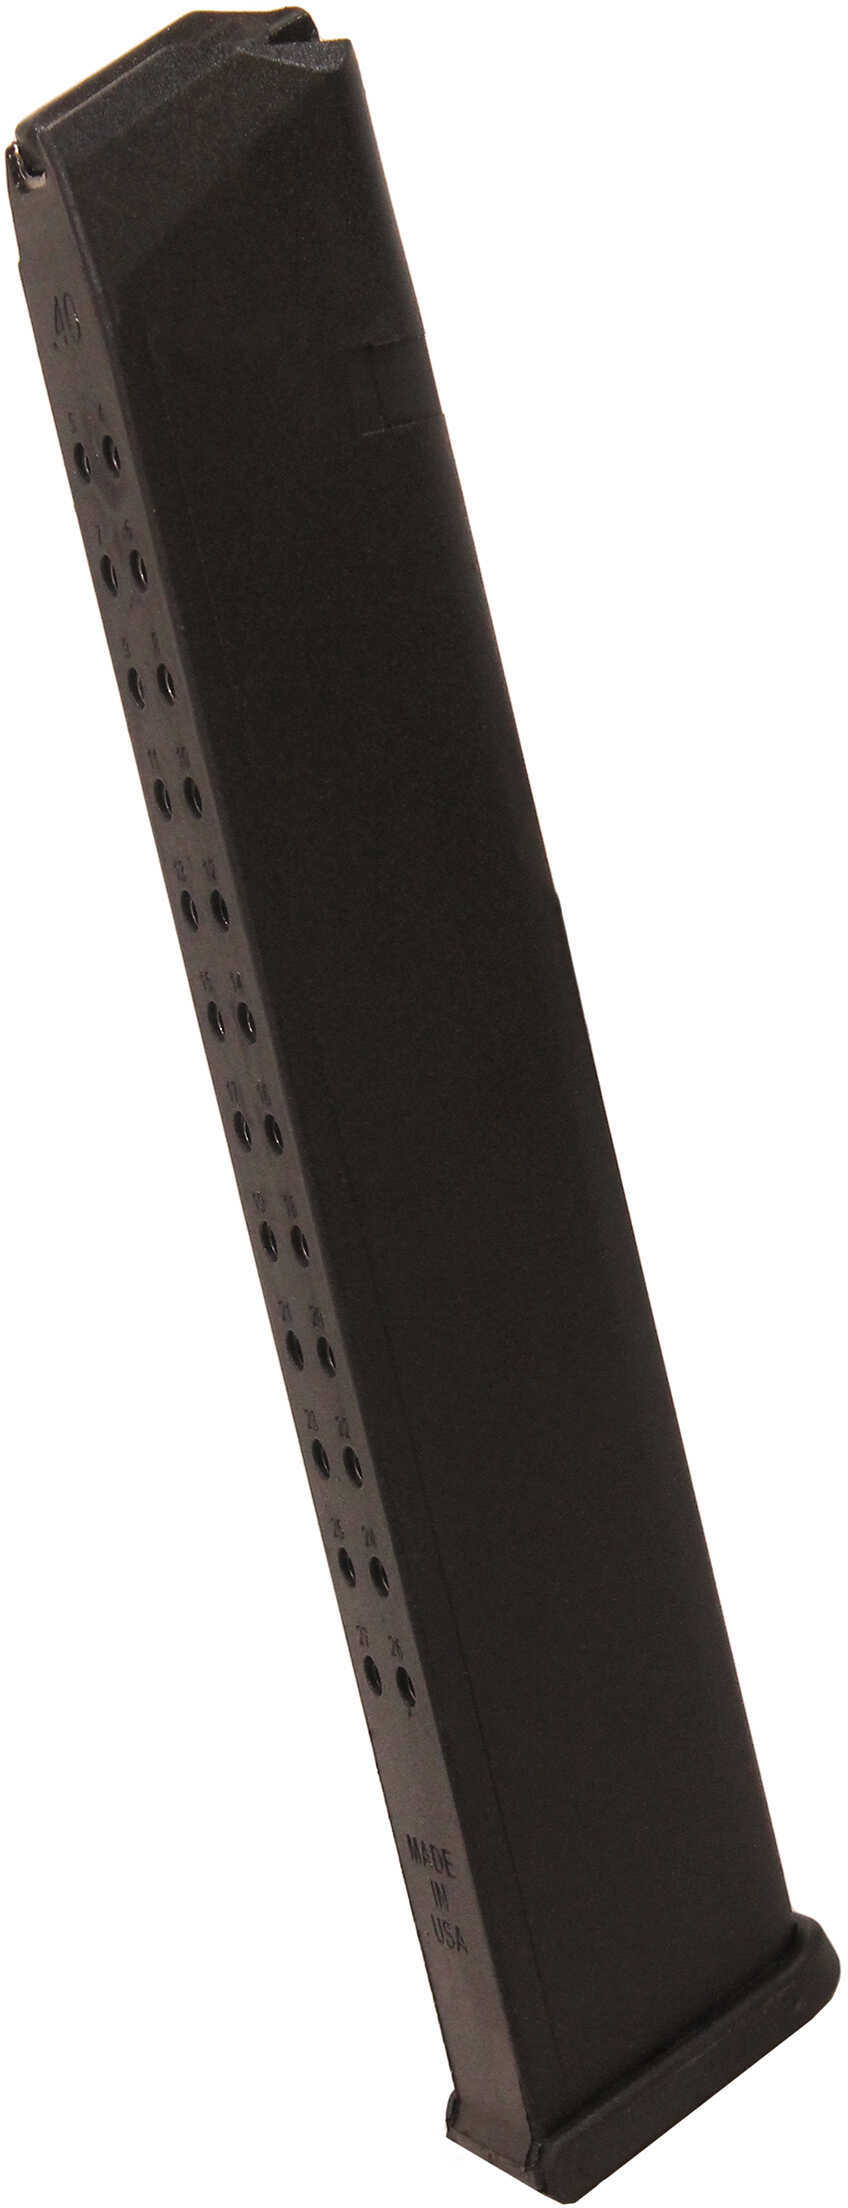 Pro Mag Magazine for Glock 22/23/ 27 .40S&W 27-RDS. Black Polymer